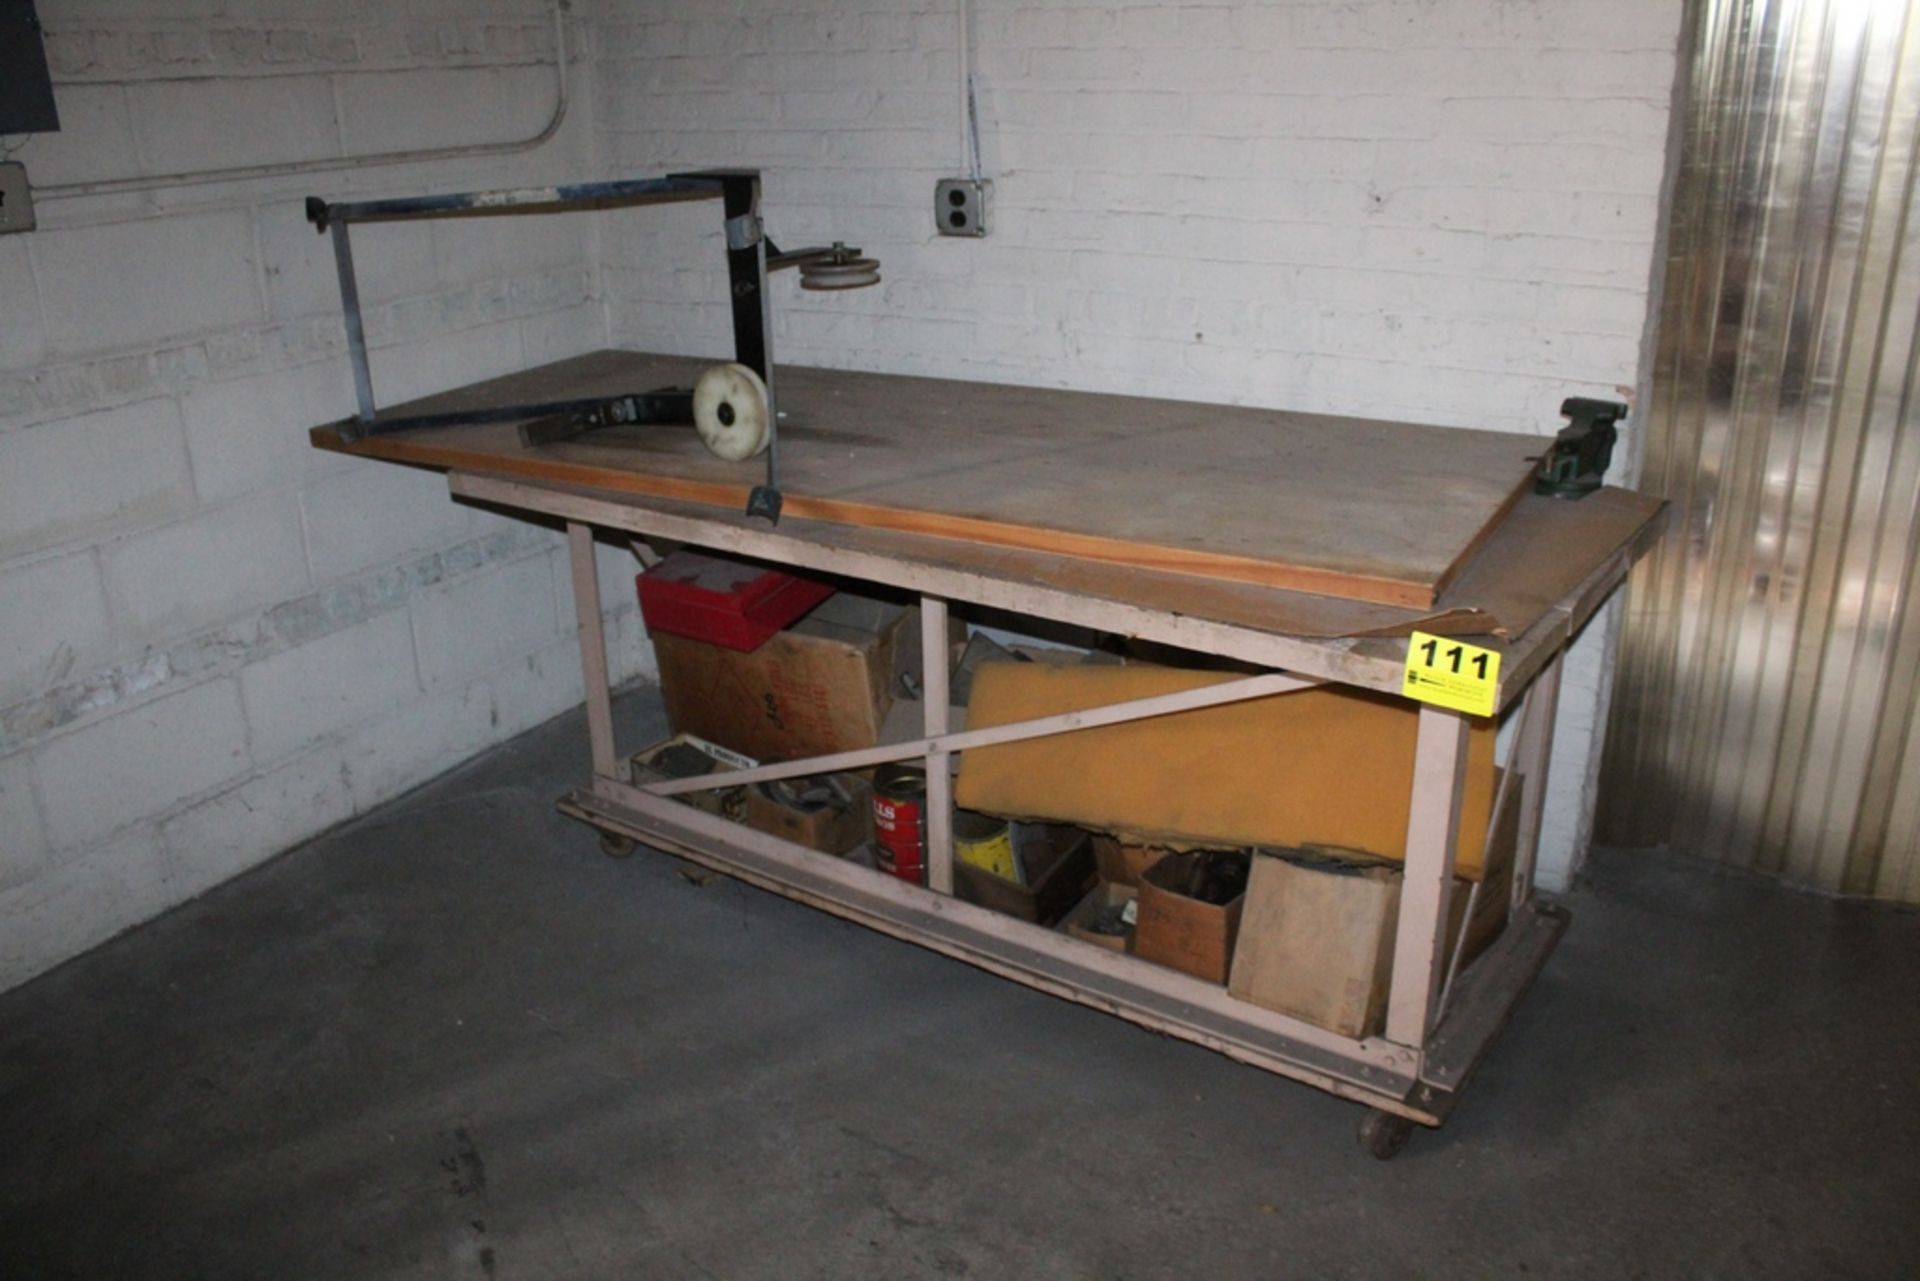 PORTABLE WORK TABLE 7' X 34" X 31" WITH DUNLAP 3 1/4" VISE